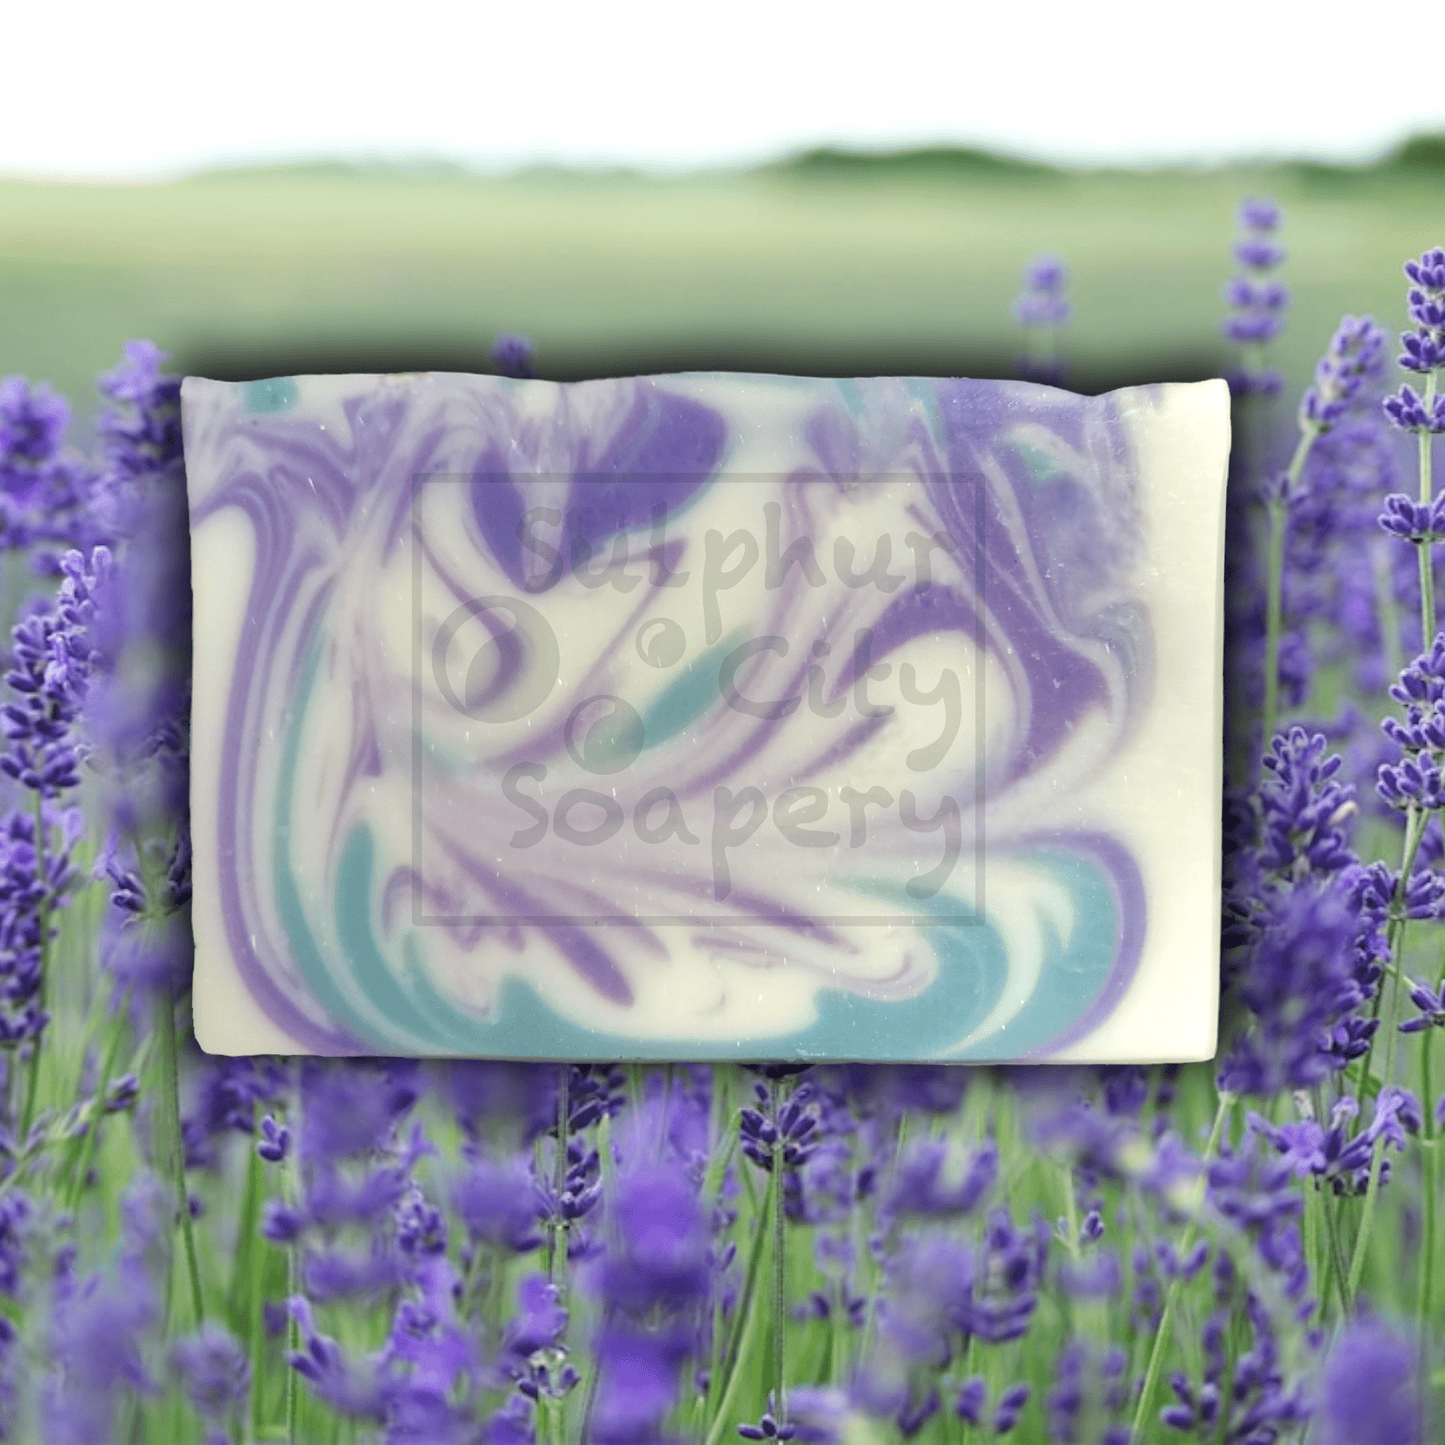 Sulphur City Soapery soap White Sage and Lavender scented soap.